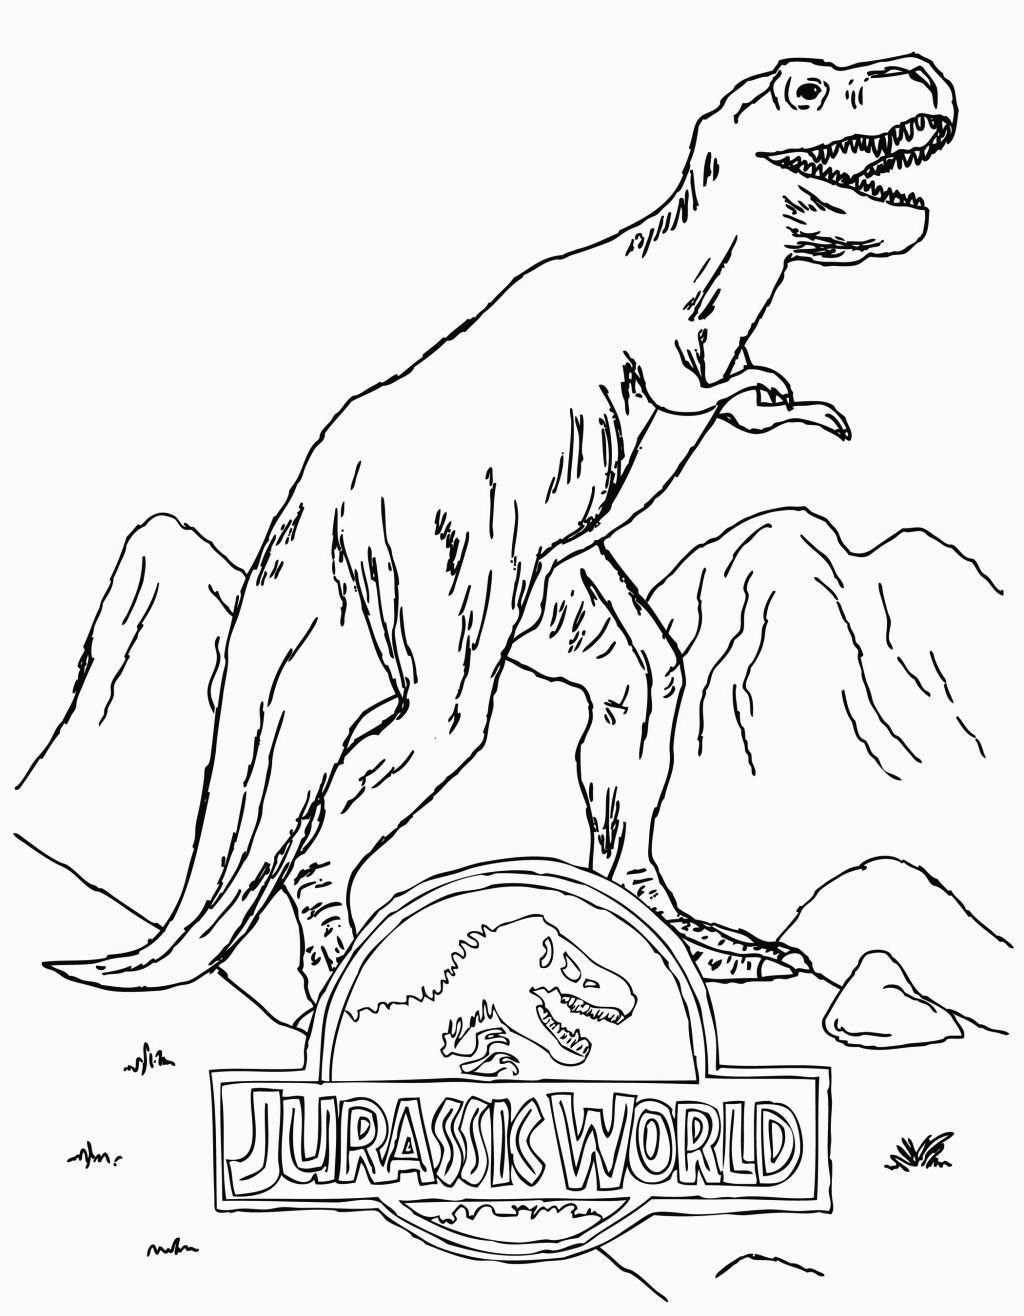 Jurassic World Coloring Pages - Best Coloring Pages For Kids